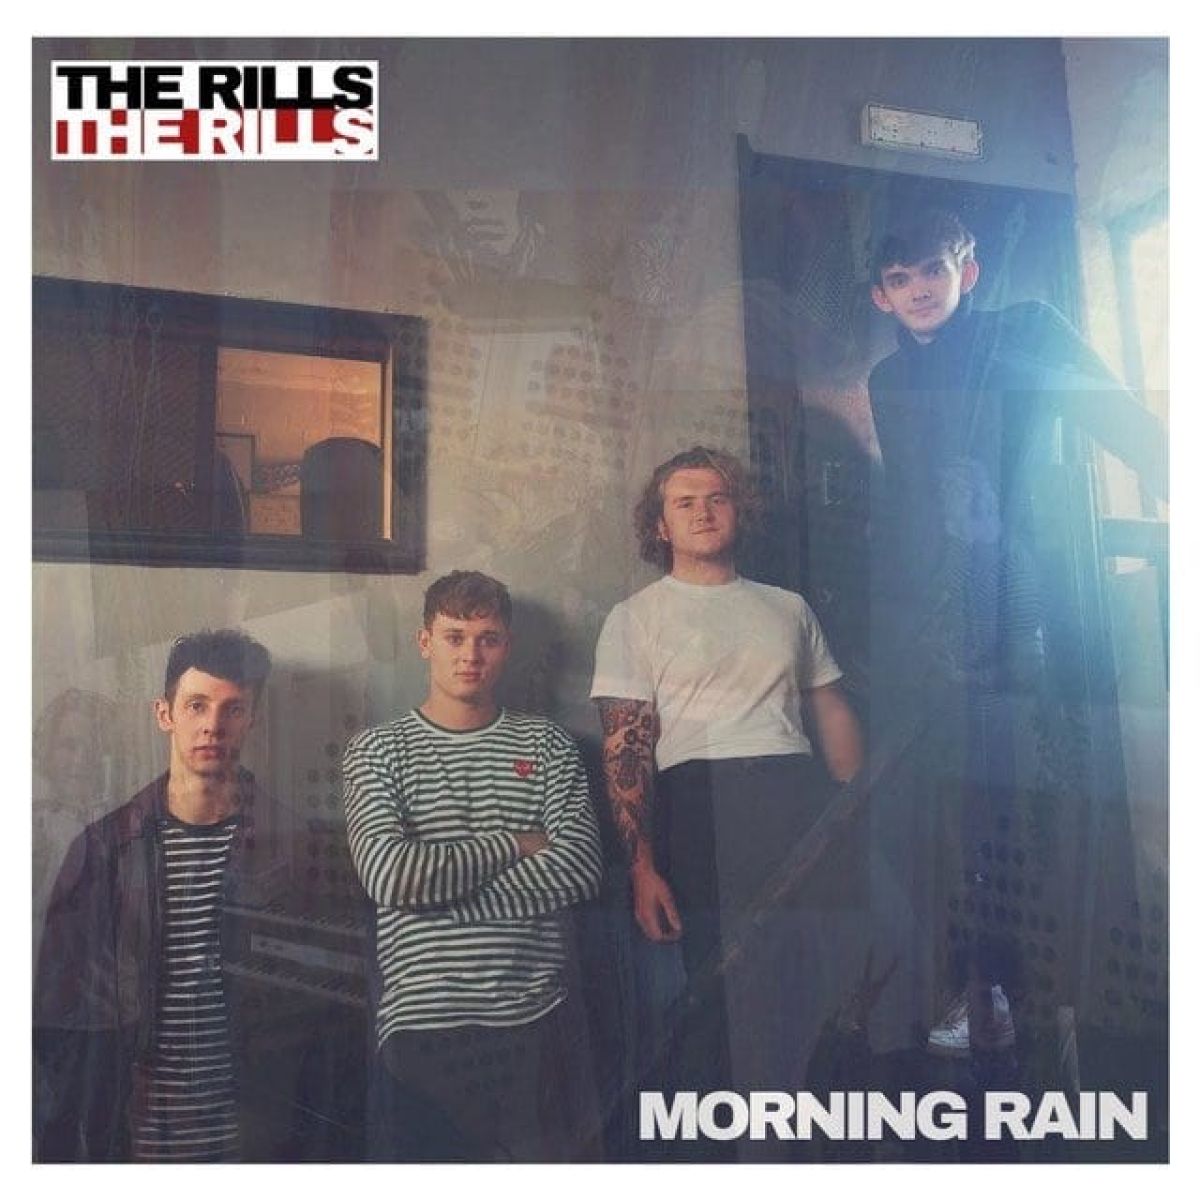 Single Review: Morning Rain/ Photo Booth by The Rills